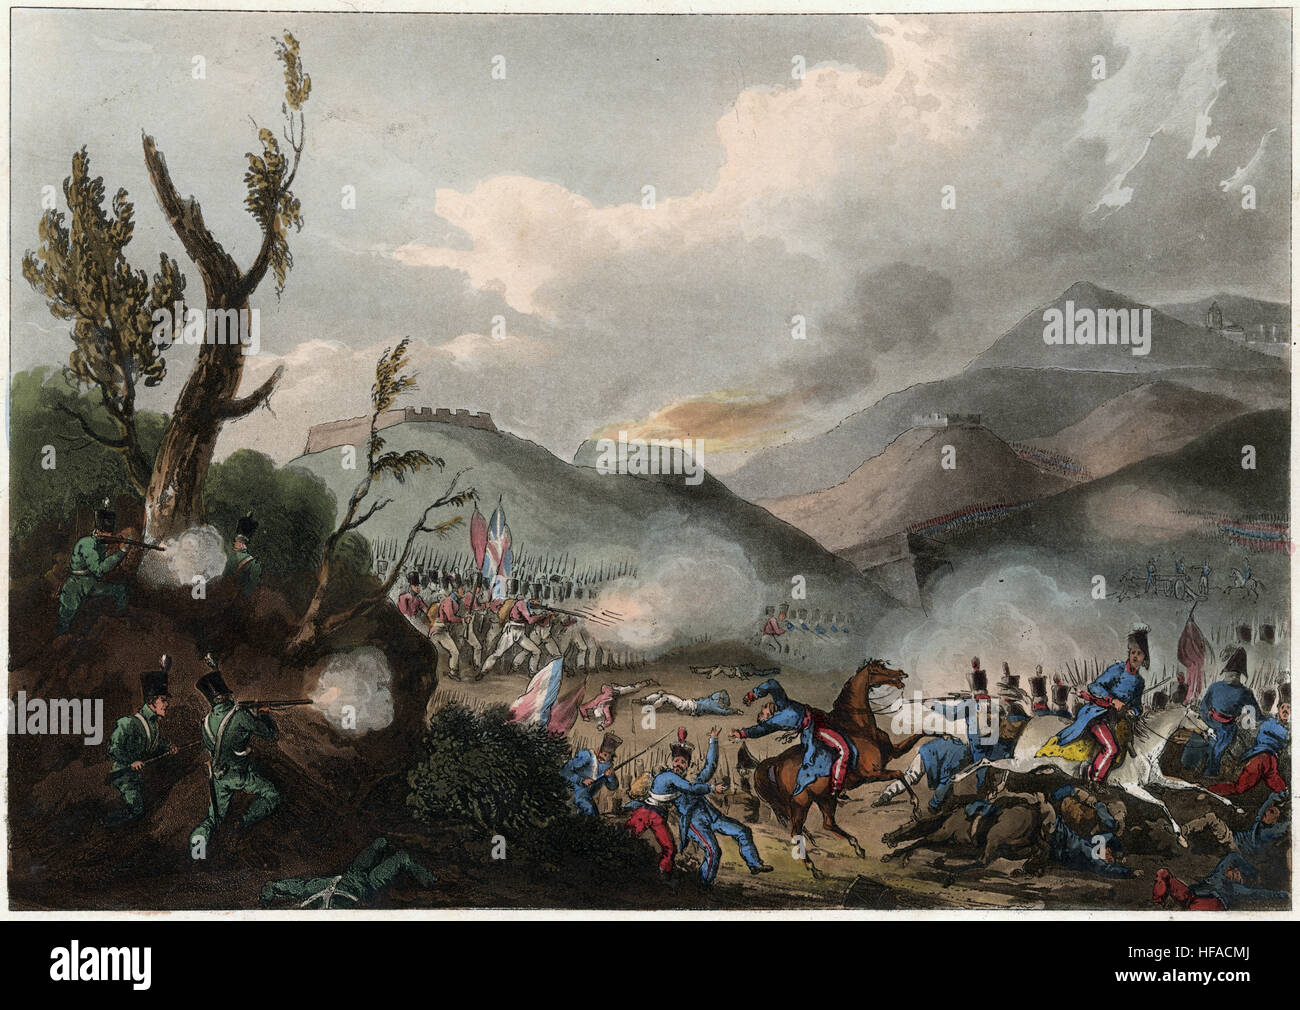 Antique 1815 engraving, hand-colored scene of the Battle of Bussaco. The Battle of Buçaco, fought on 27 September 1810 during the Peninsular War in the Portuguese mountain range of Serra do Buçaco, resulted in the defeat of French forces by Lord Wellington's Anglo-Portuguese Army. SOURCE: ORIGINAL ENGRAVING. Stock Photo